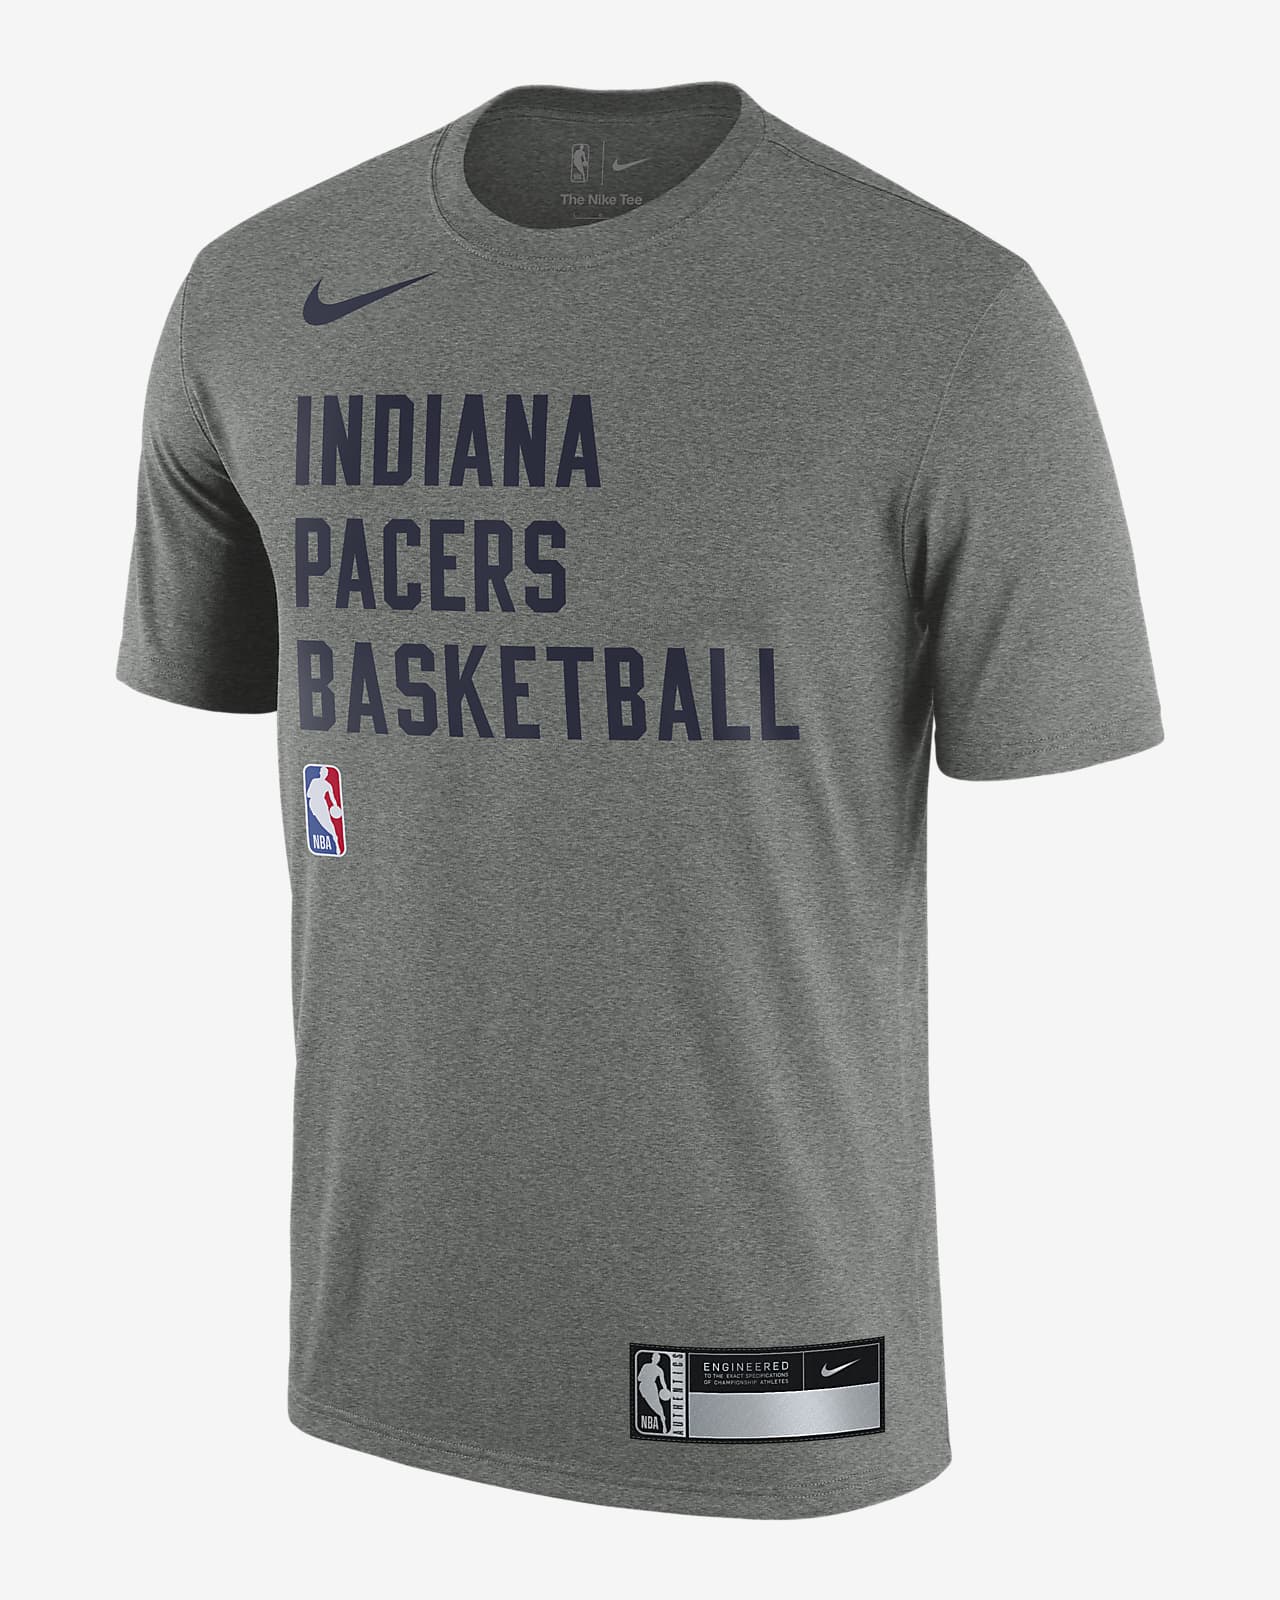 Nike Men's Indiana Pacers Grey Practice T-Shirt, XL, Gray